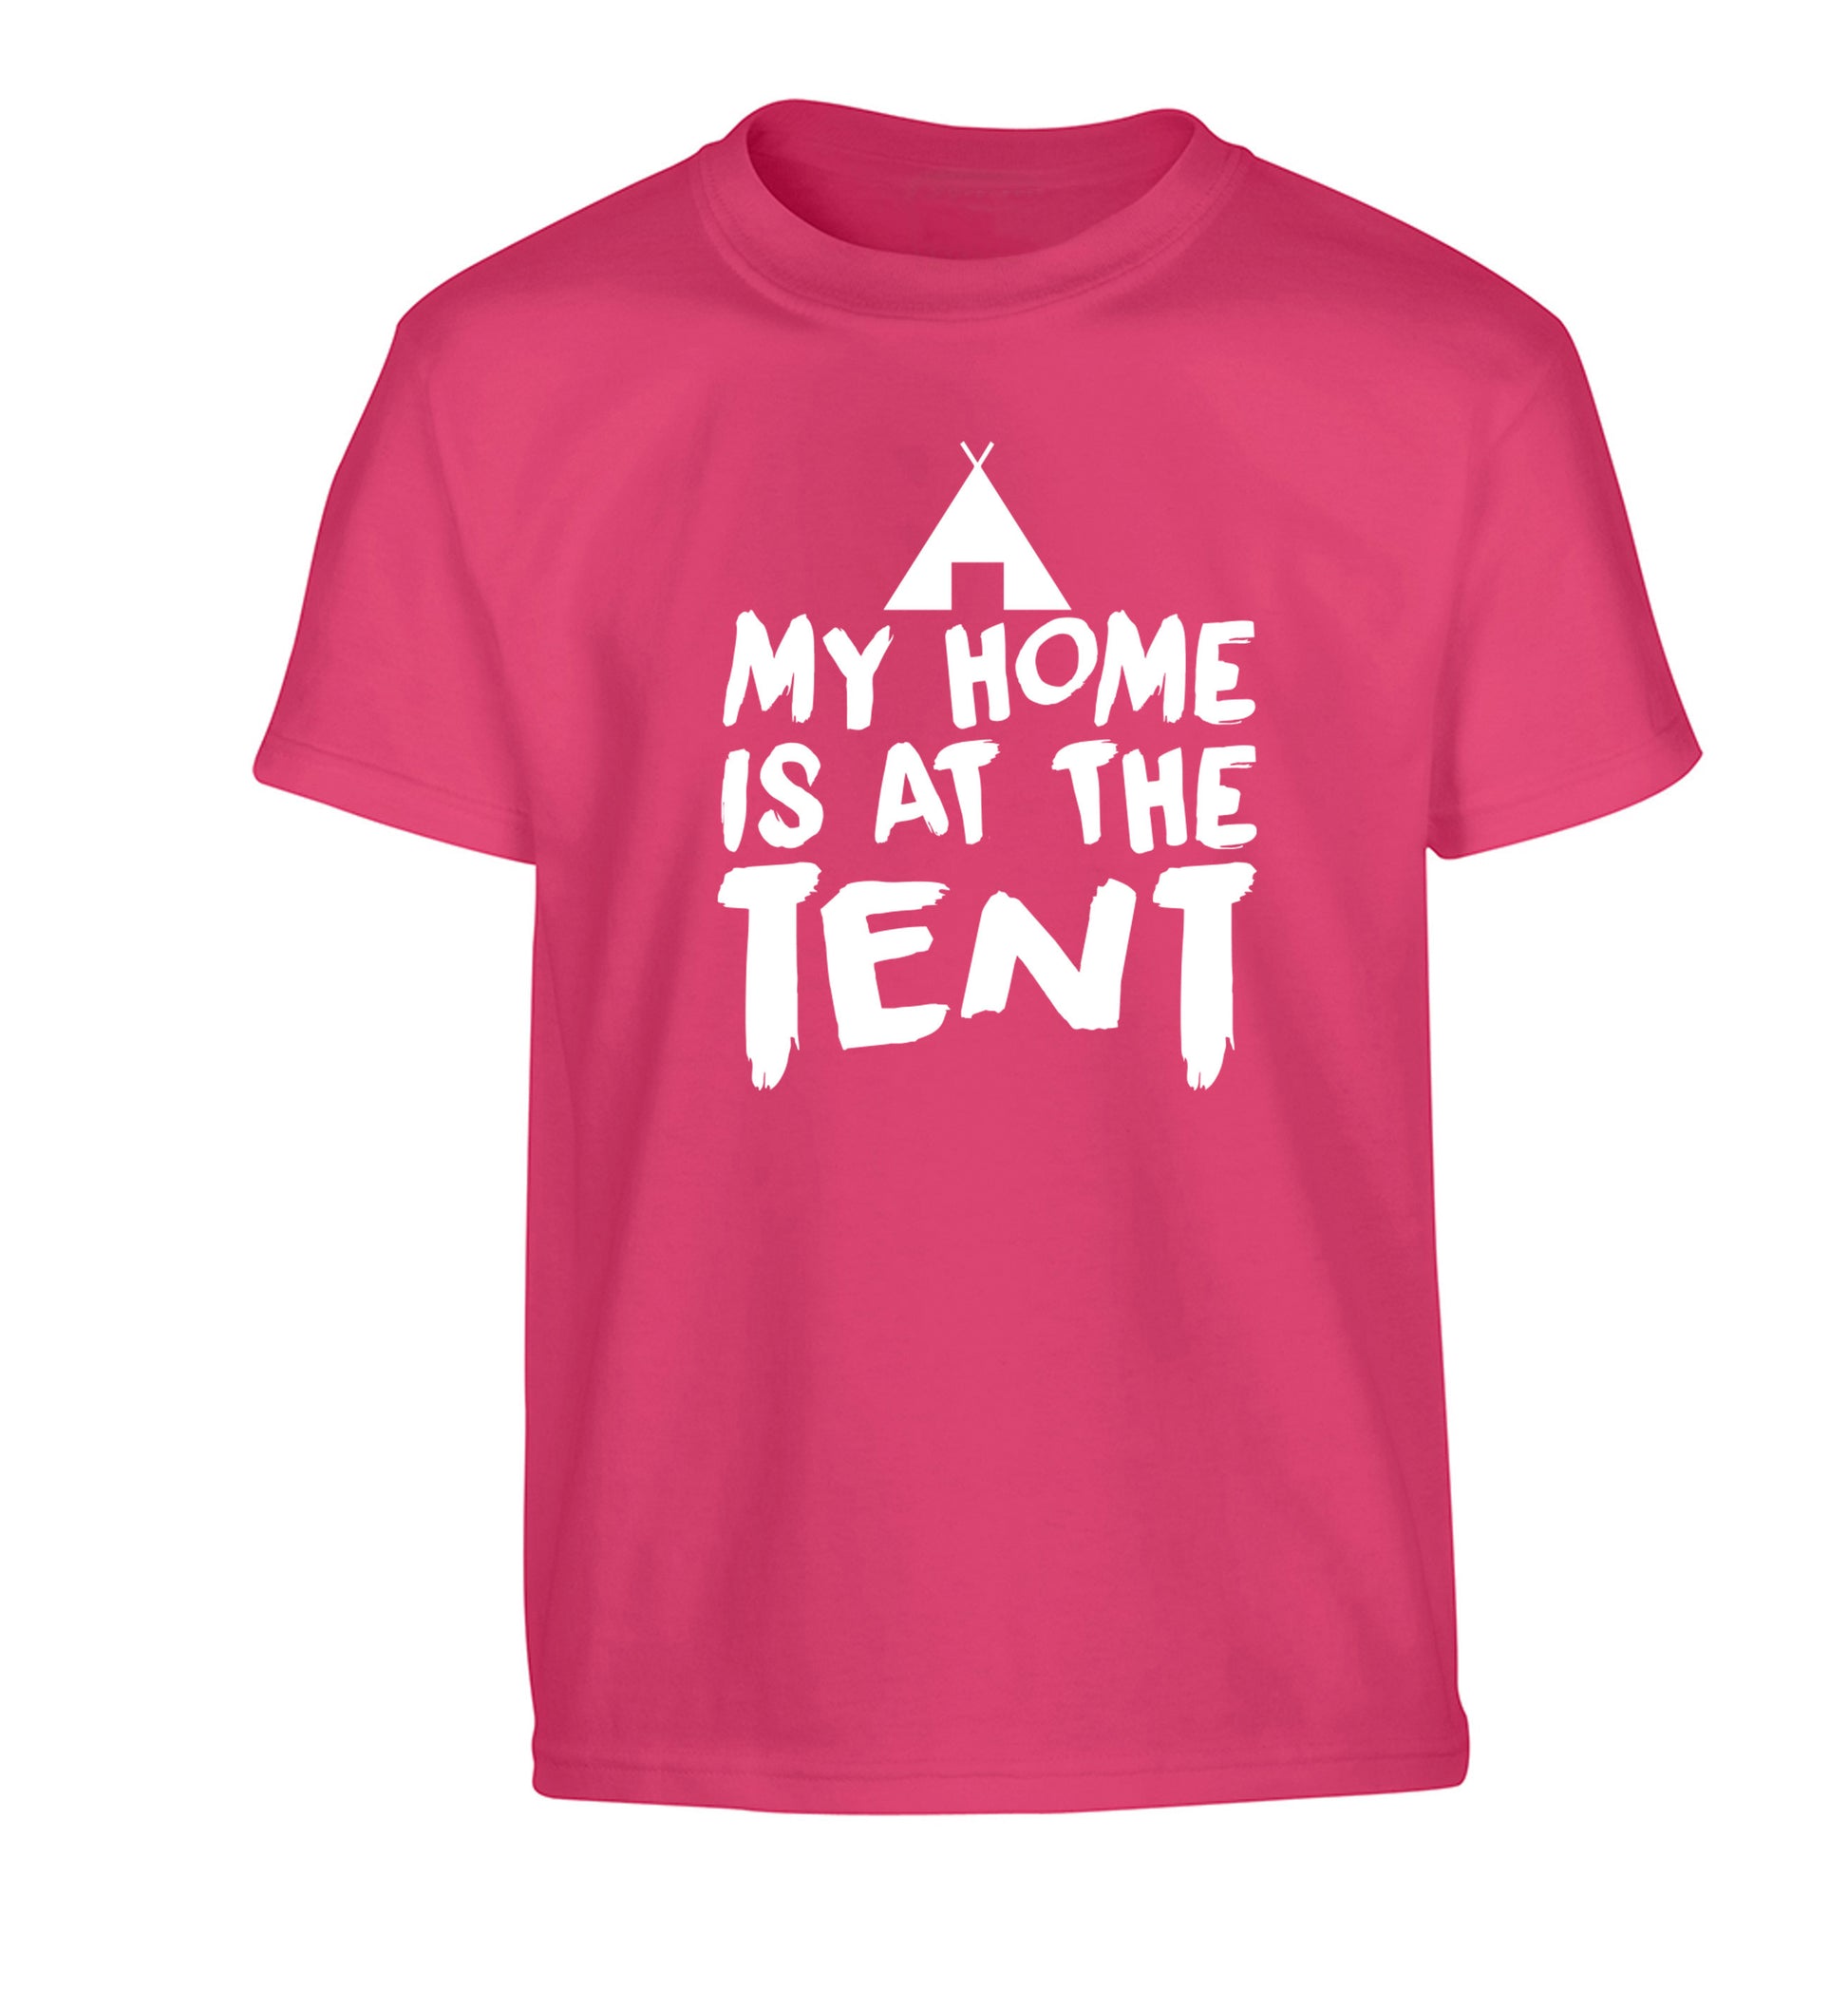 My home is at the tent Children's pink Tshirt 12-14 Years